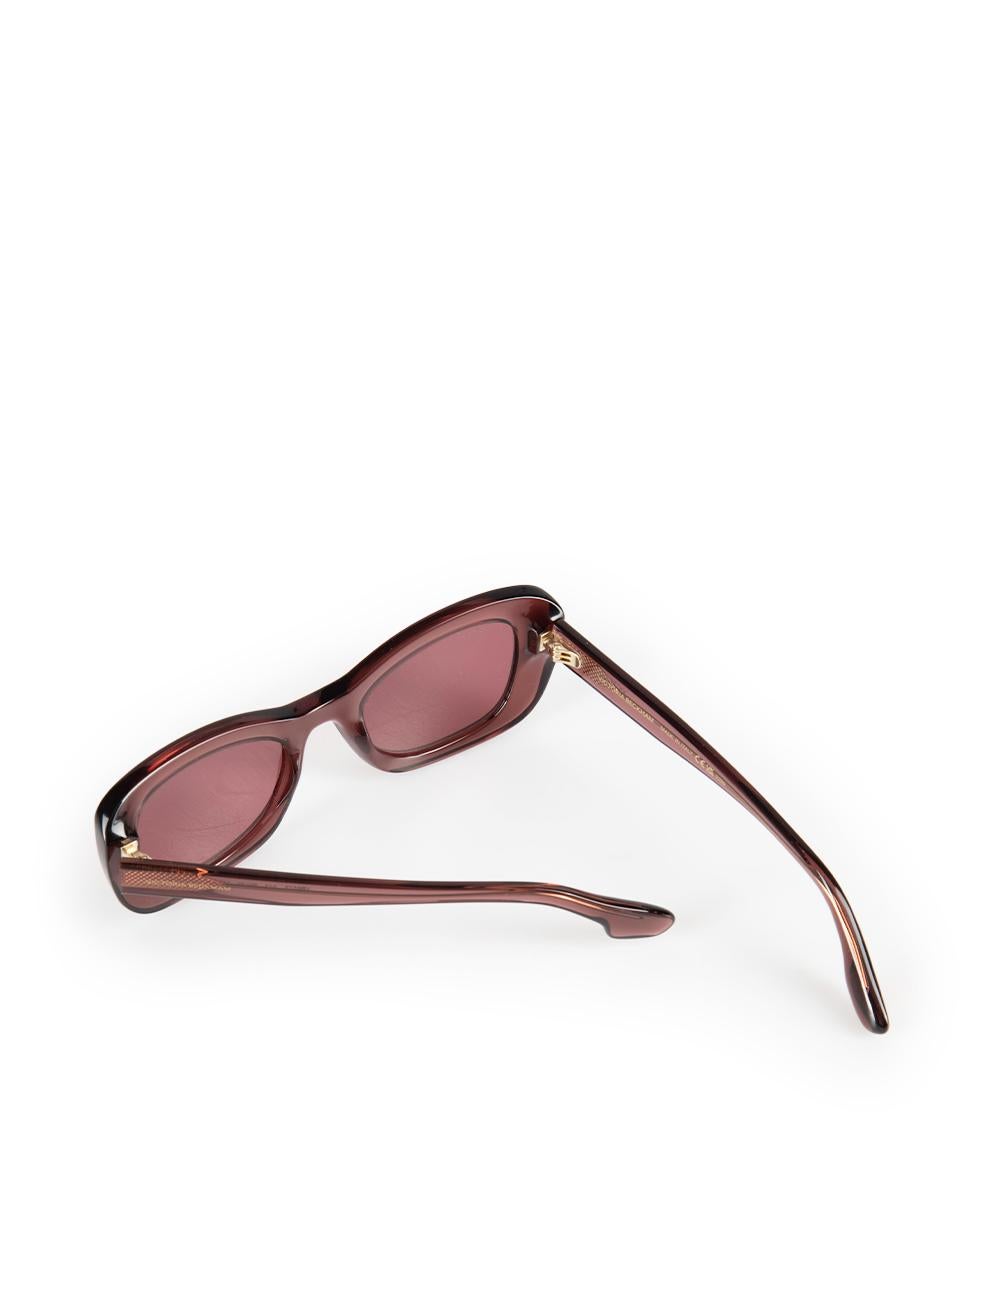 Victoria Beckham Purple Butterfly Sunglasses For Sale 4